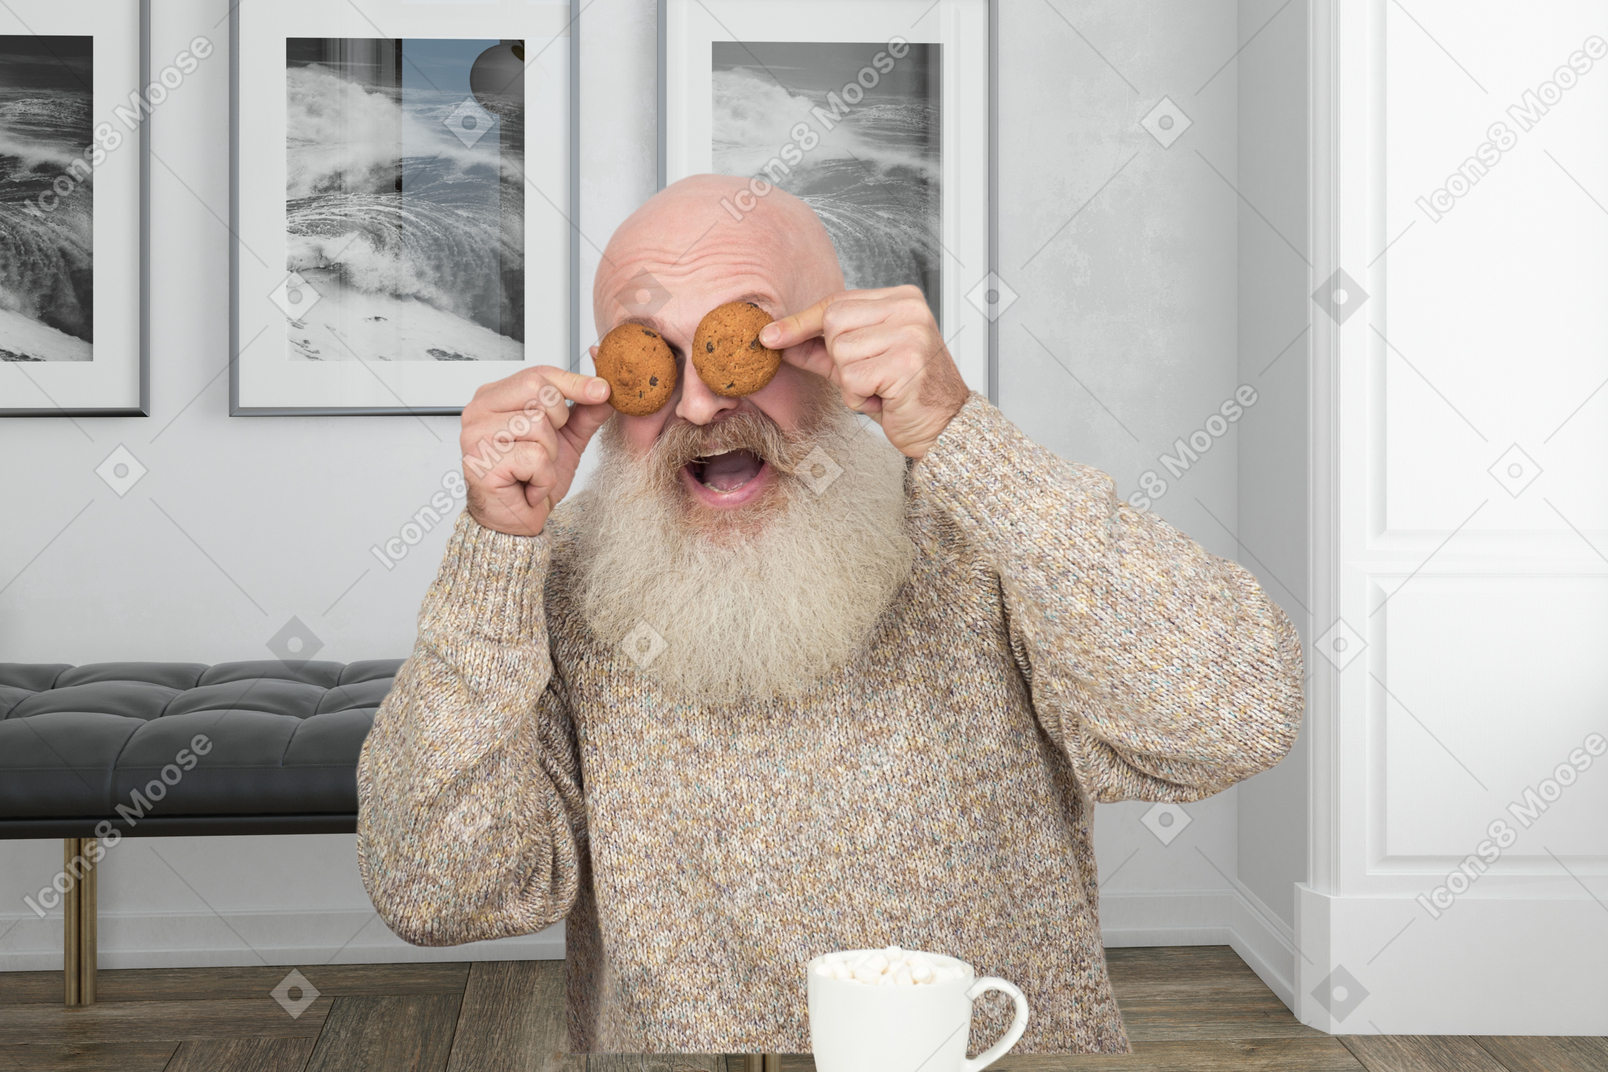 Elderly man covering his eyes with cookies